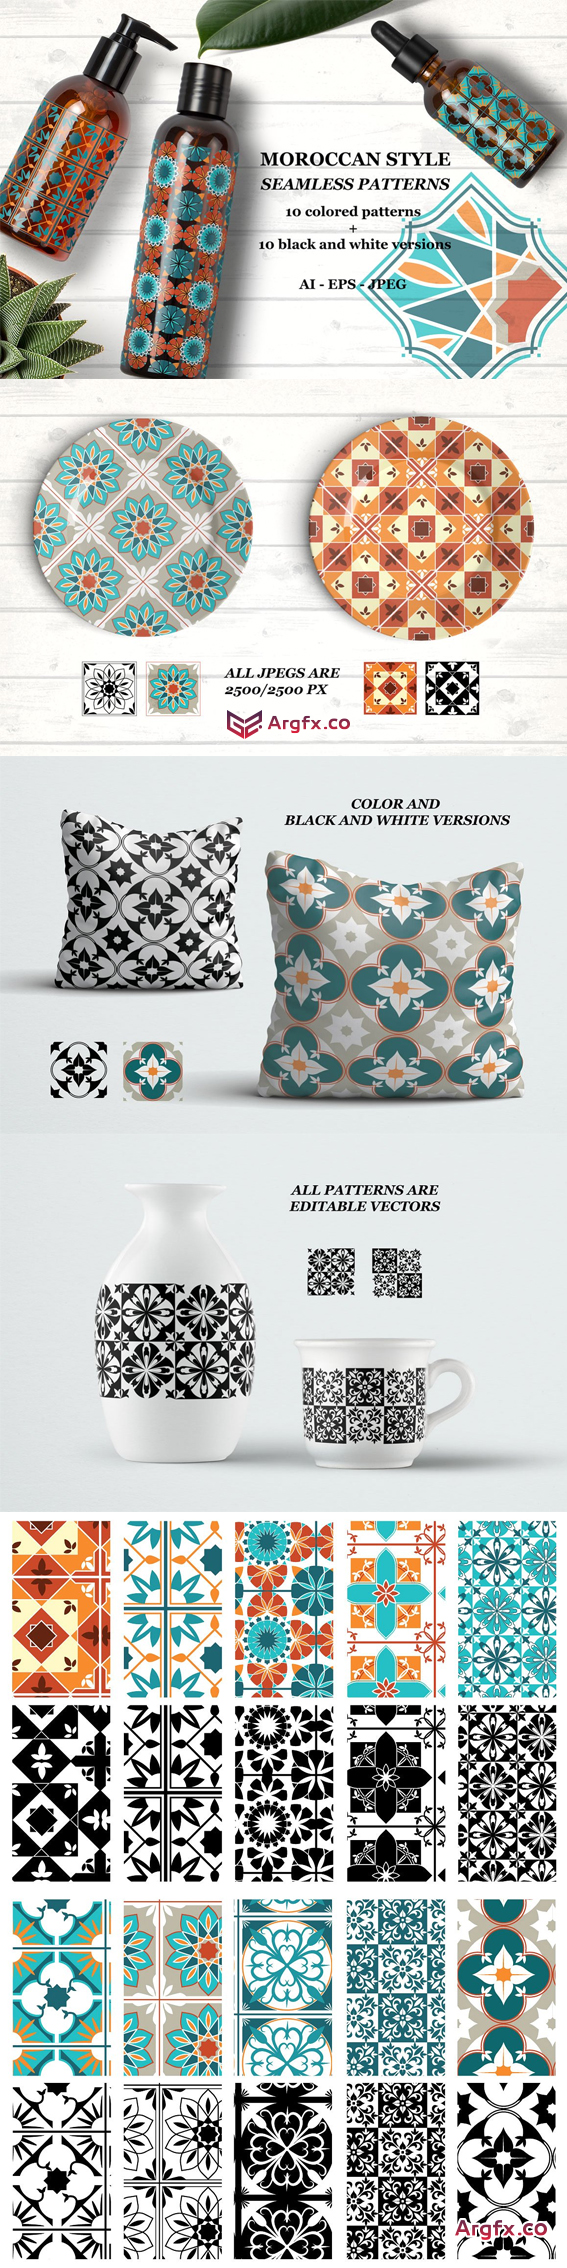  CM - Moroccan style patterns 1810822